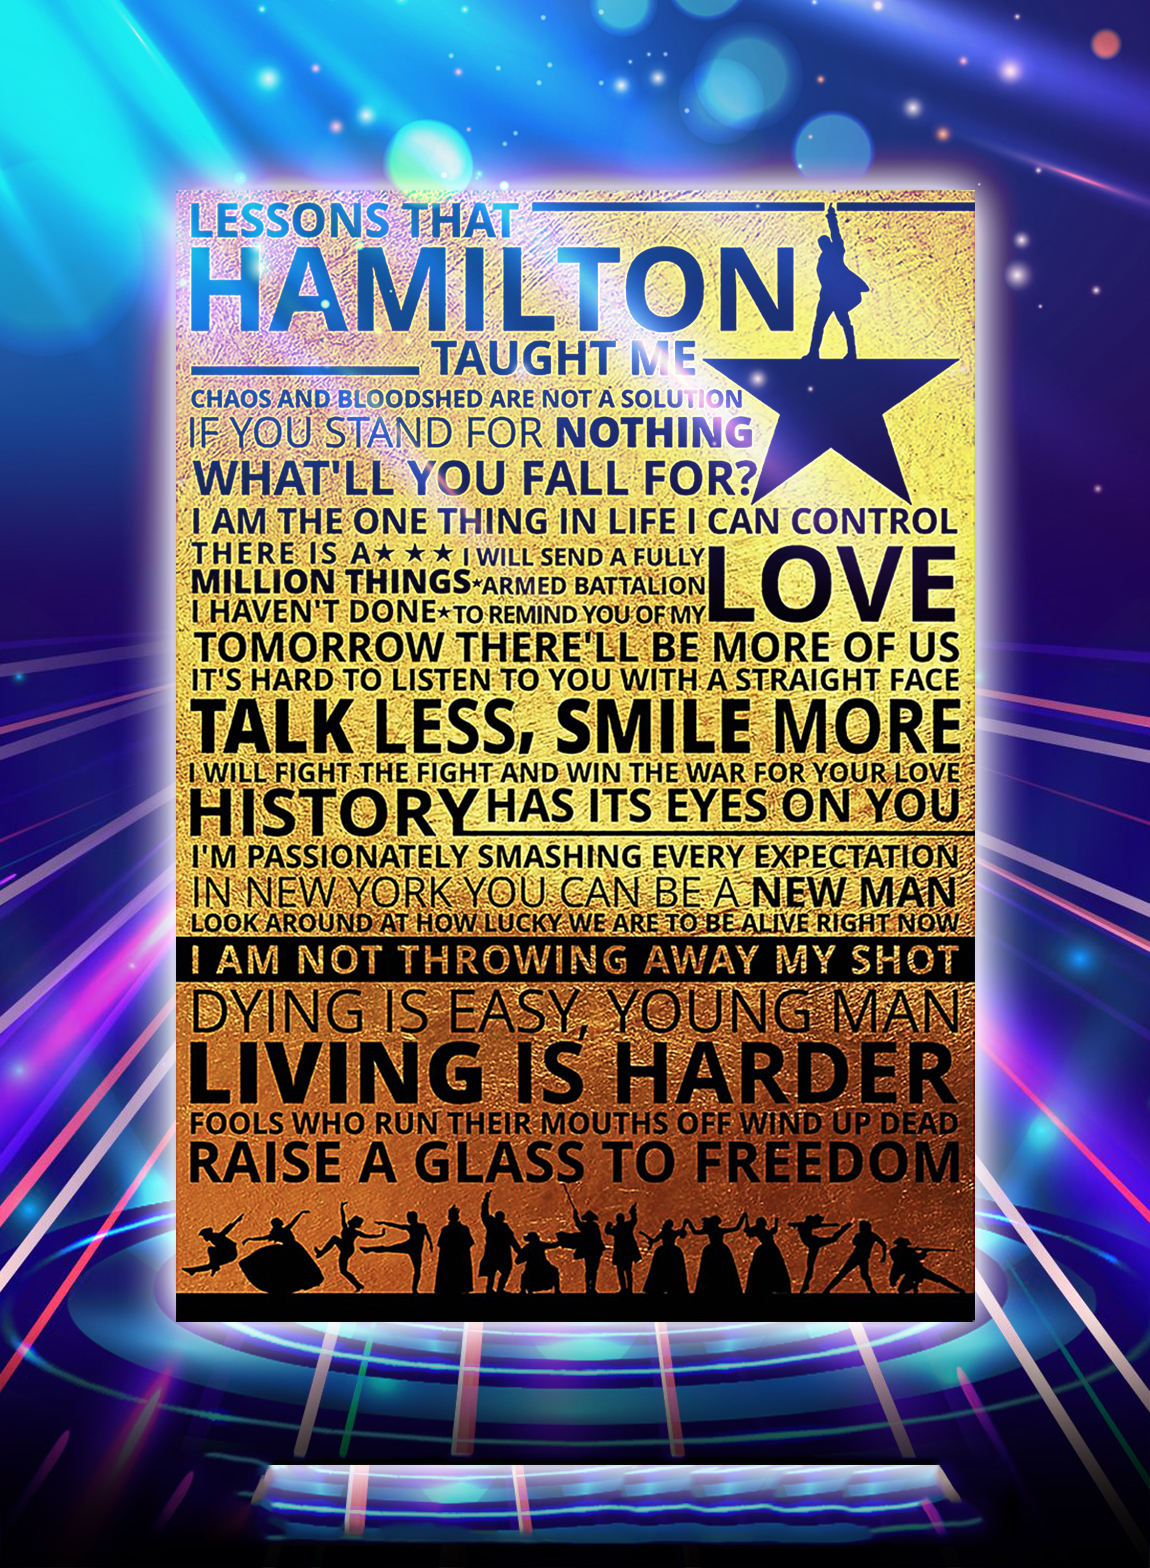 Lessons hamilton taught me poster - A3